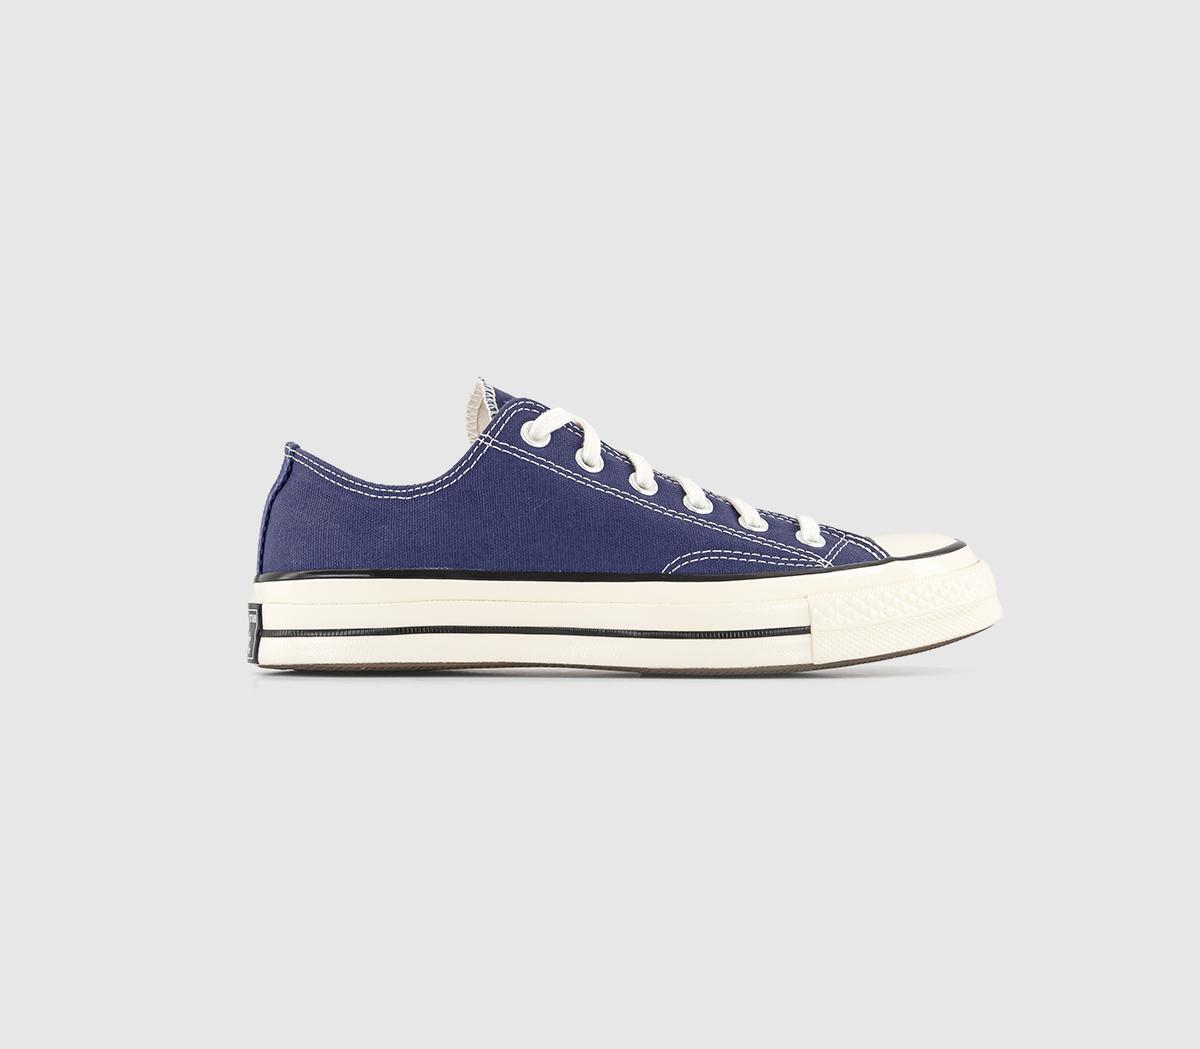 ConverseAll Star Ox 70 TrainersUncharted Waters Egret Black